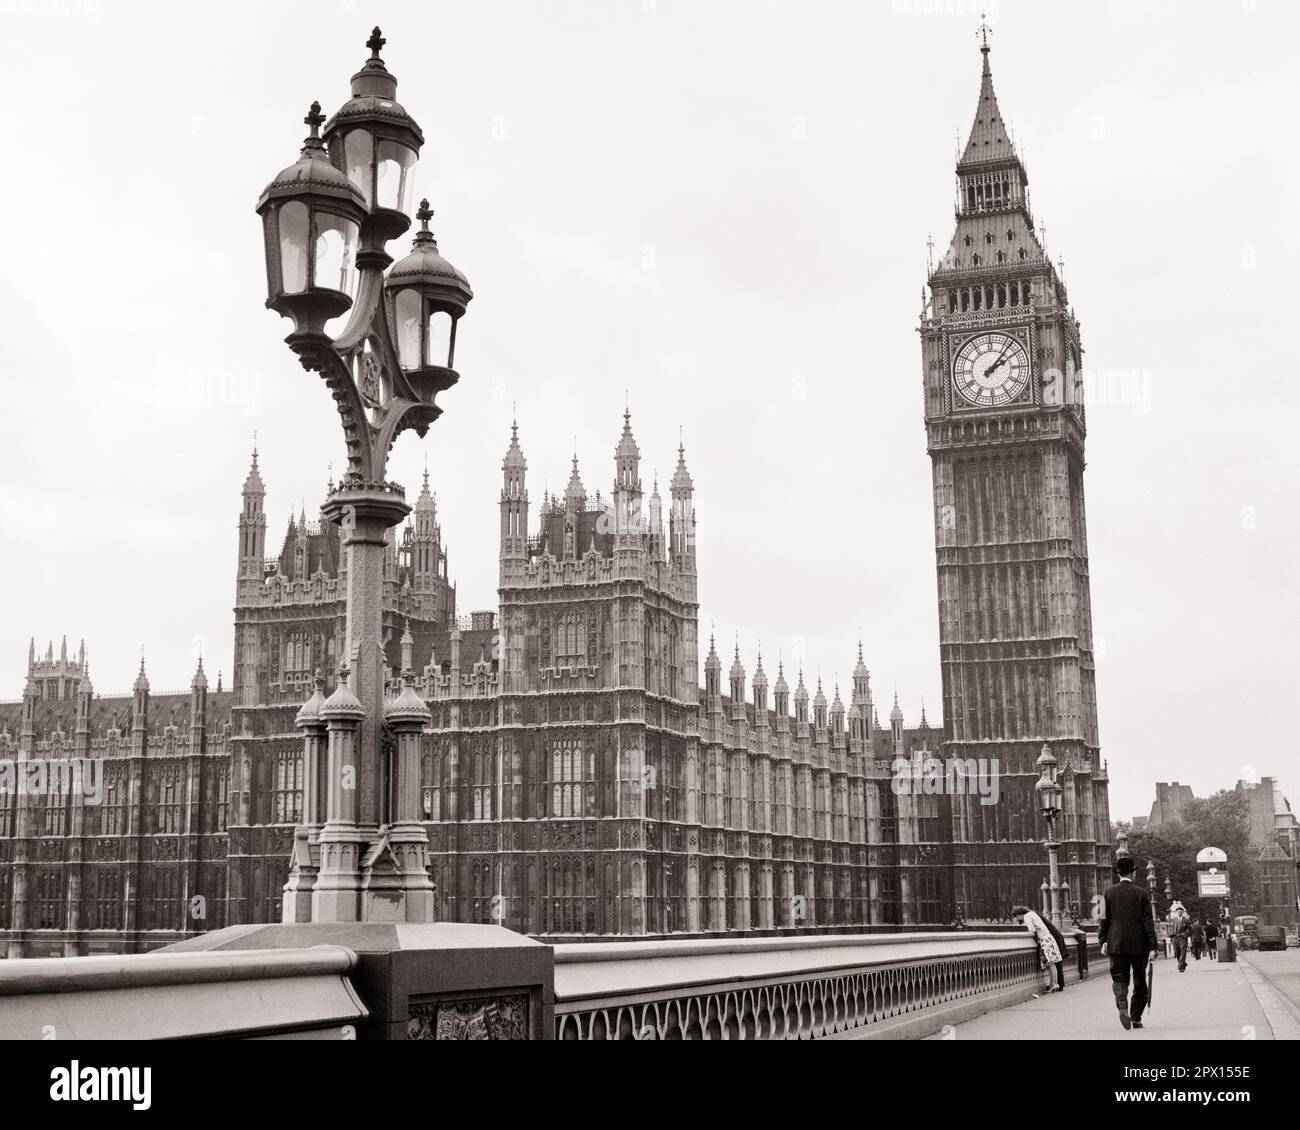 1960s HOUSES OF PARLIAMENT AND BIG BEN LONDON ON NORTH BANK OF RIVER THAMES VIEW FROM WESTMINSTER BRIDGE CENTRAL ENGLAND UK - r17295 BAU001 HARS CENTRAL LONDON CITY OF WESTMINSTER CONCEPTS NEO-GOTHIC NICKNAME SERVES BLACK AND WHITE CLOCK TOWER CRITIC GREAT BRITAIN ICONIC KNOWN OLD FASHIONED PARLIAMENT REPRESENTATION UNITED KINGDOM Stock Photo